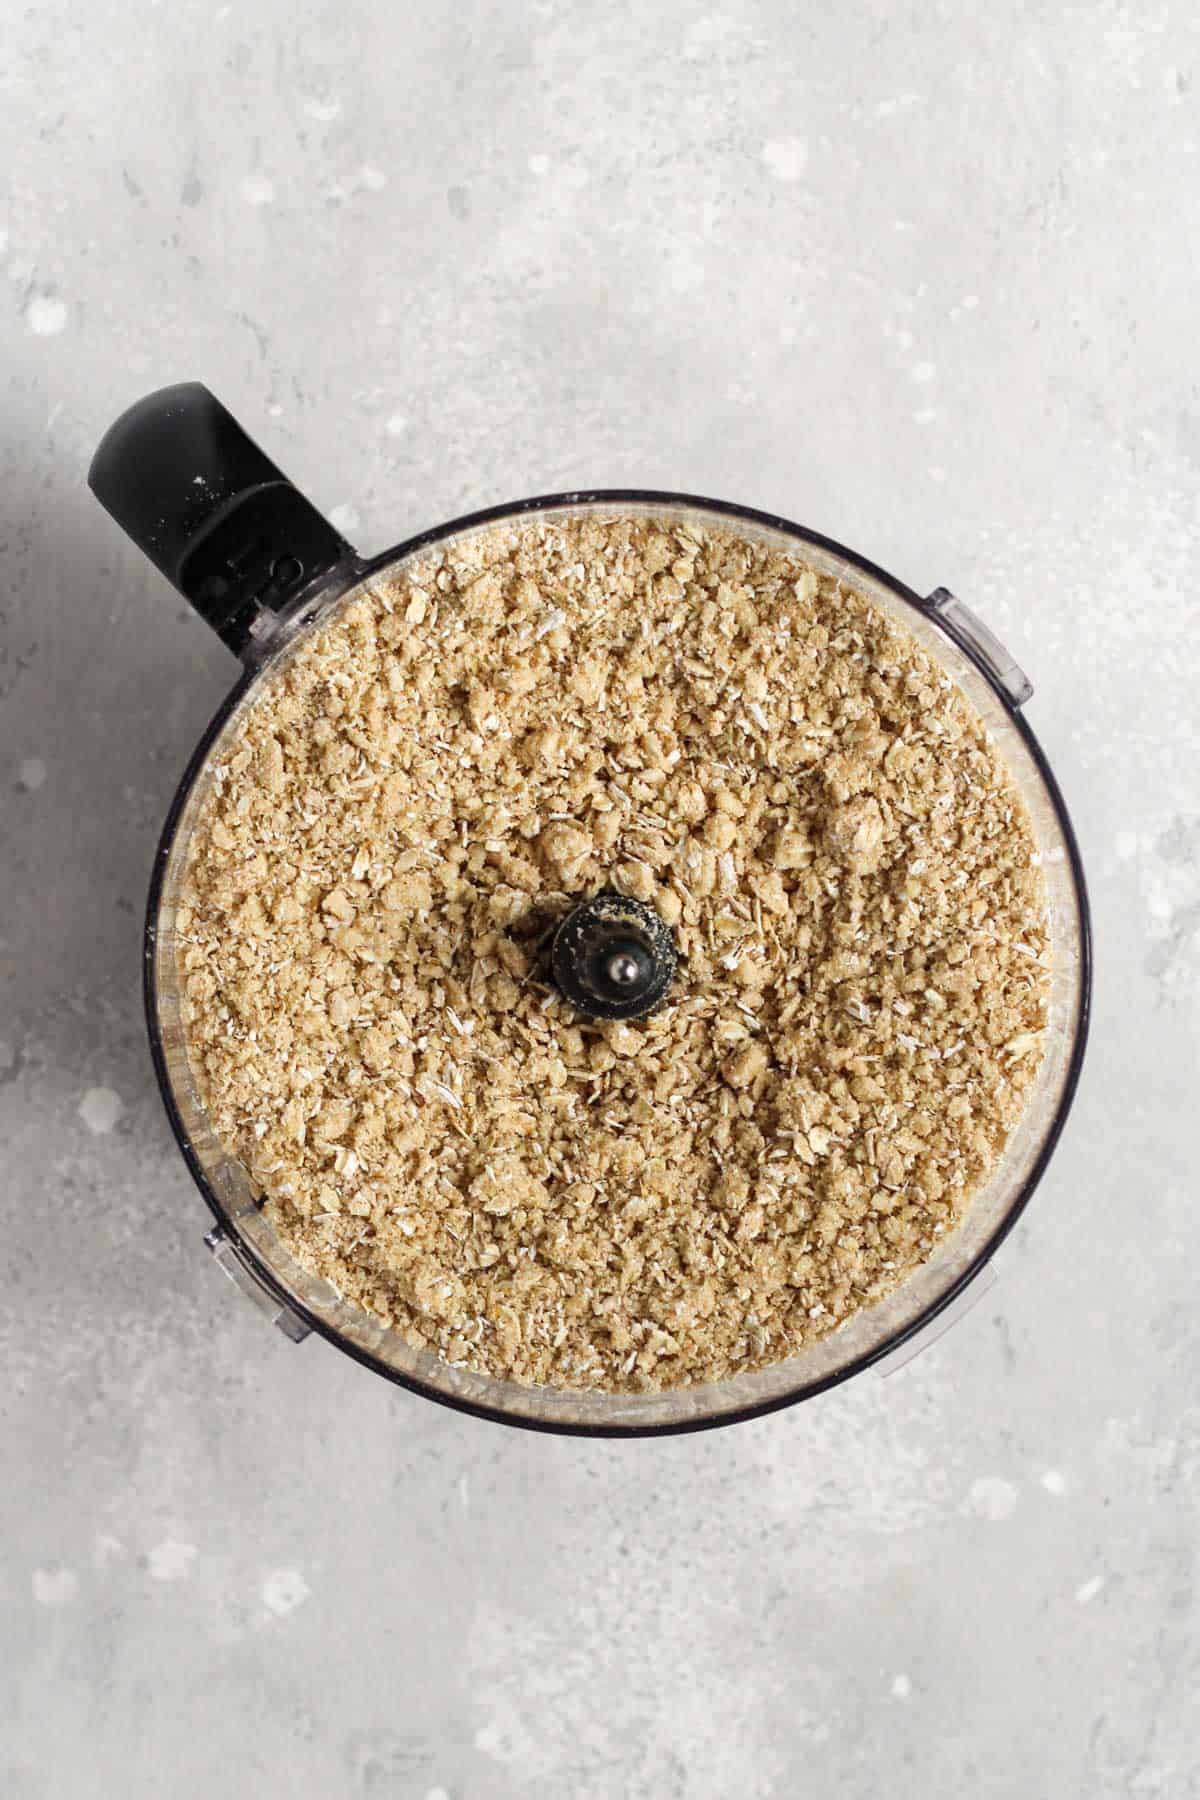 Crust and topping ingredients in a food processor processed with butter into a crumble mixture.